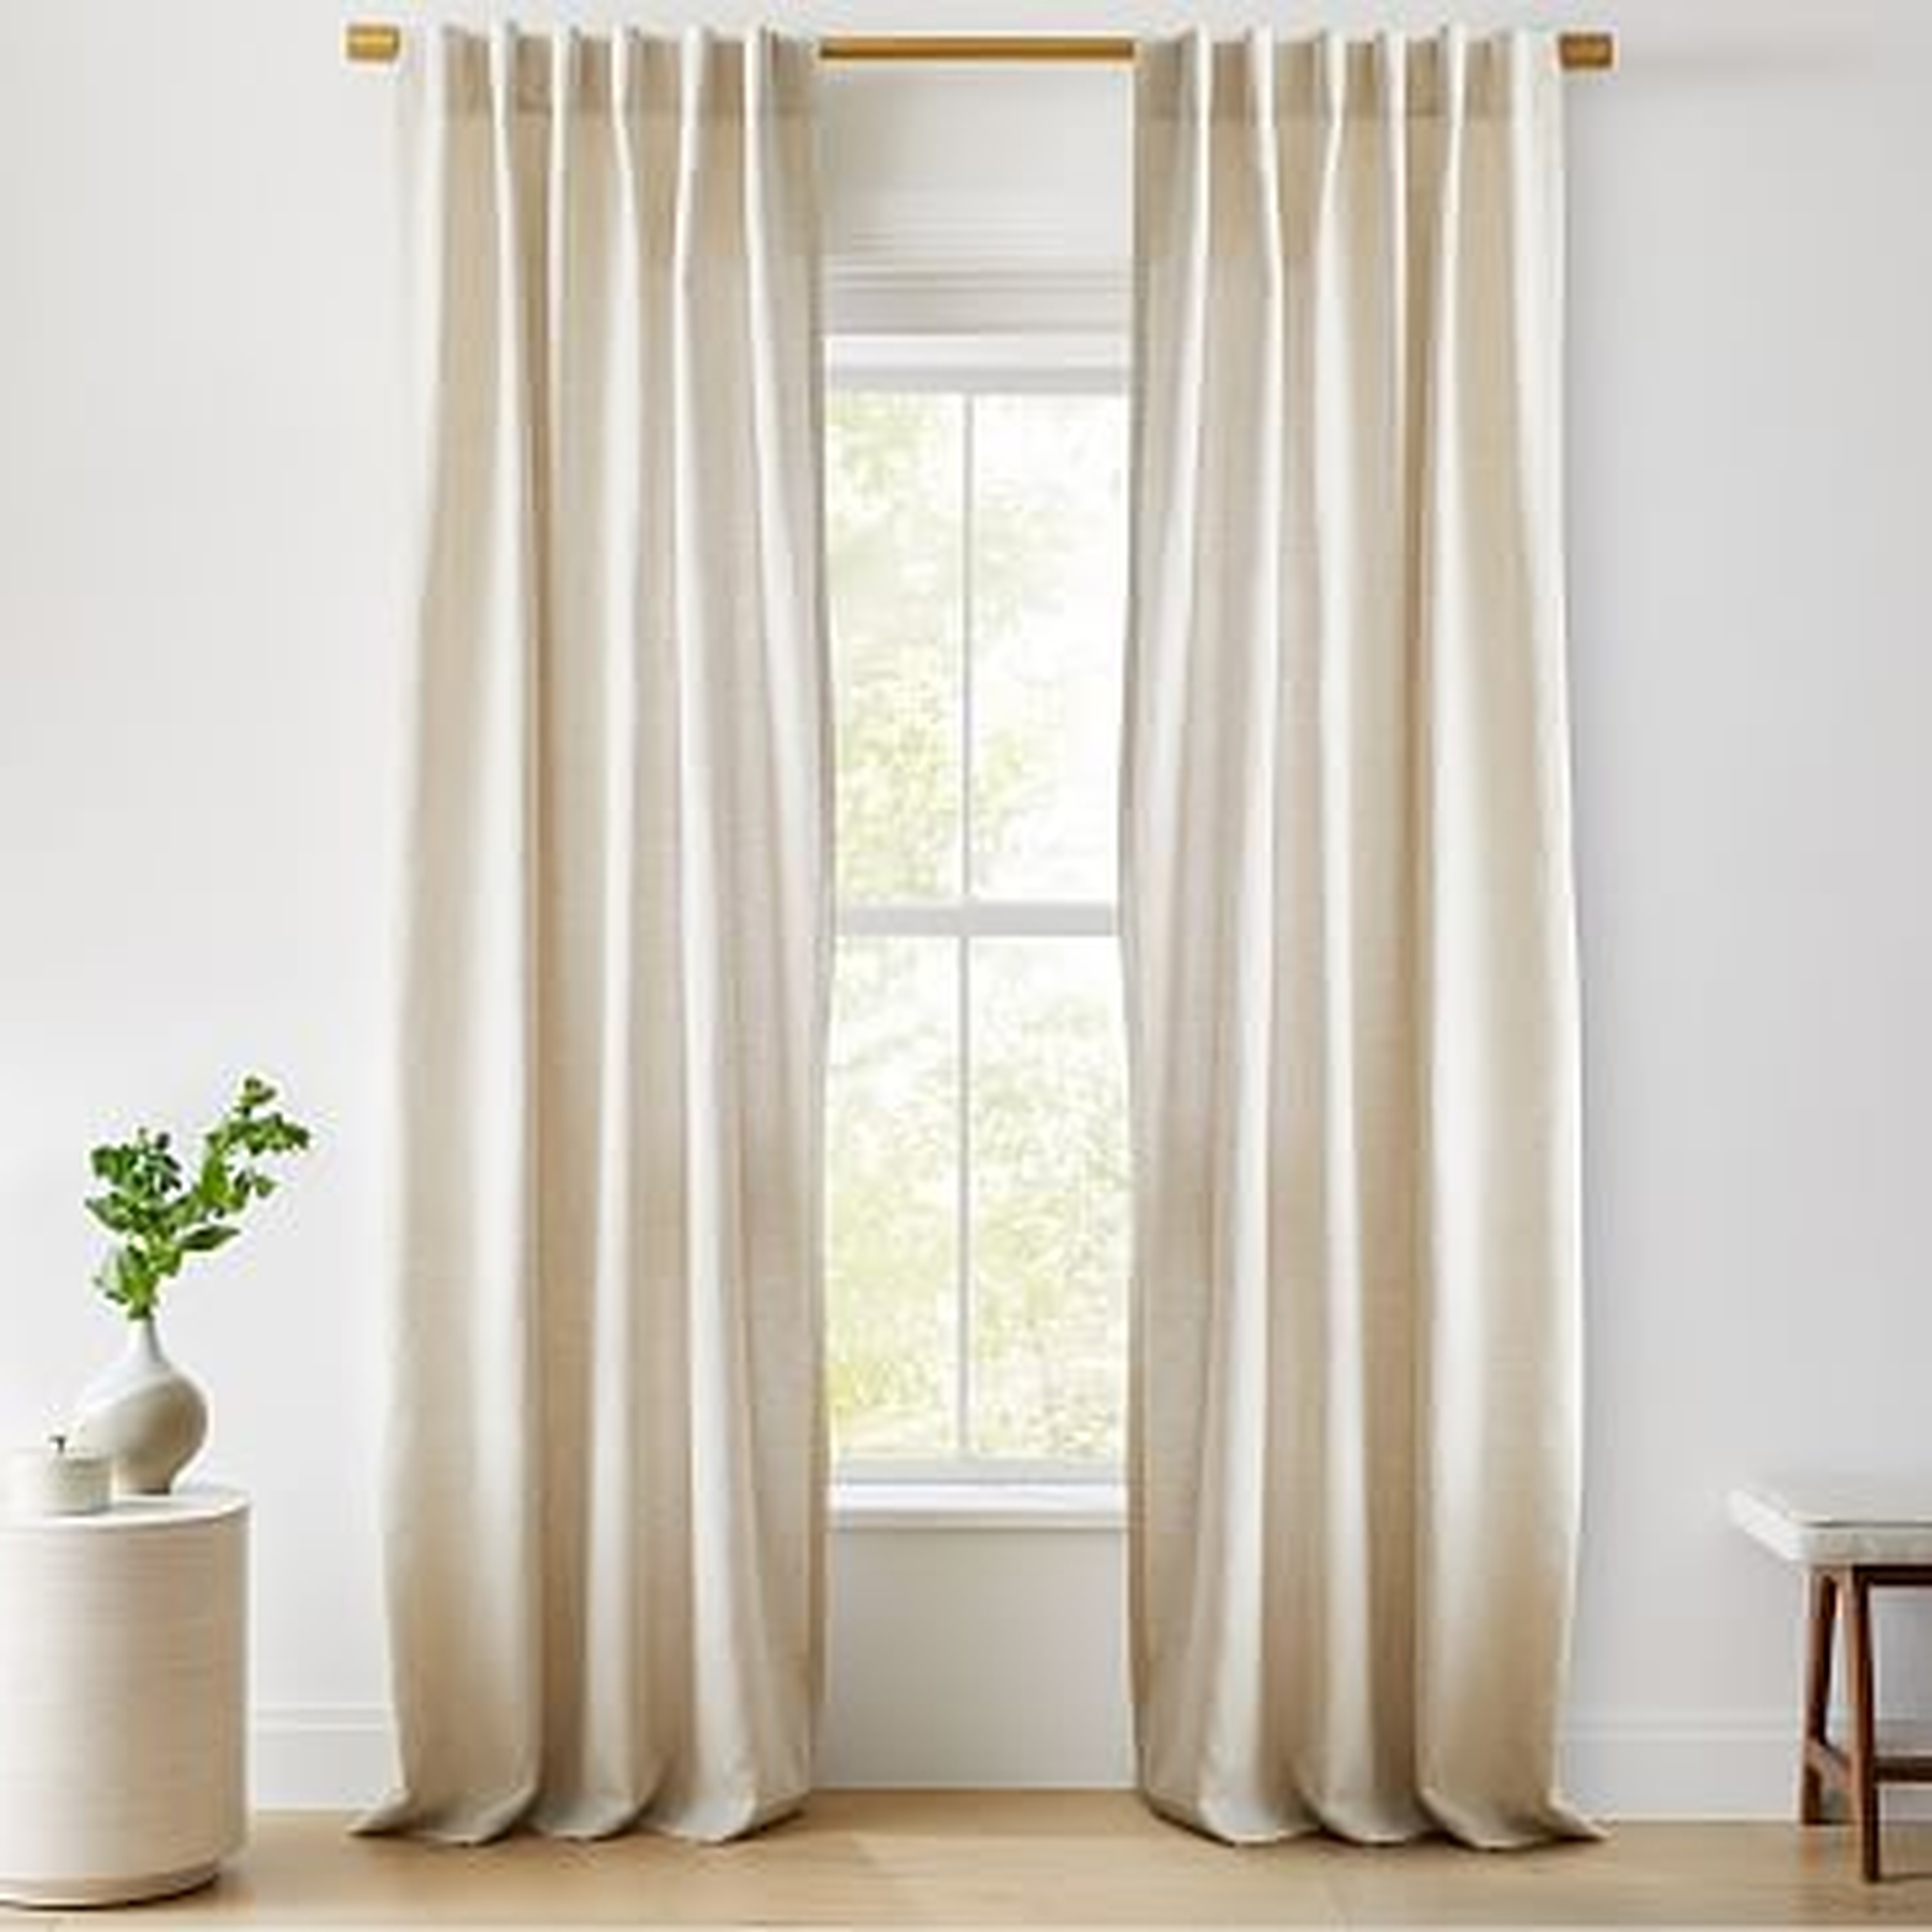 Custom Size Solid European Flax Linen Curtain with Blackout Lining, Natural, 120x136" - West Elm